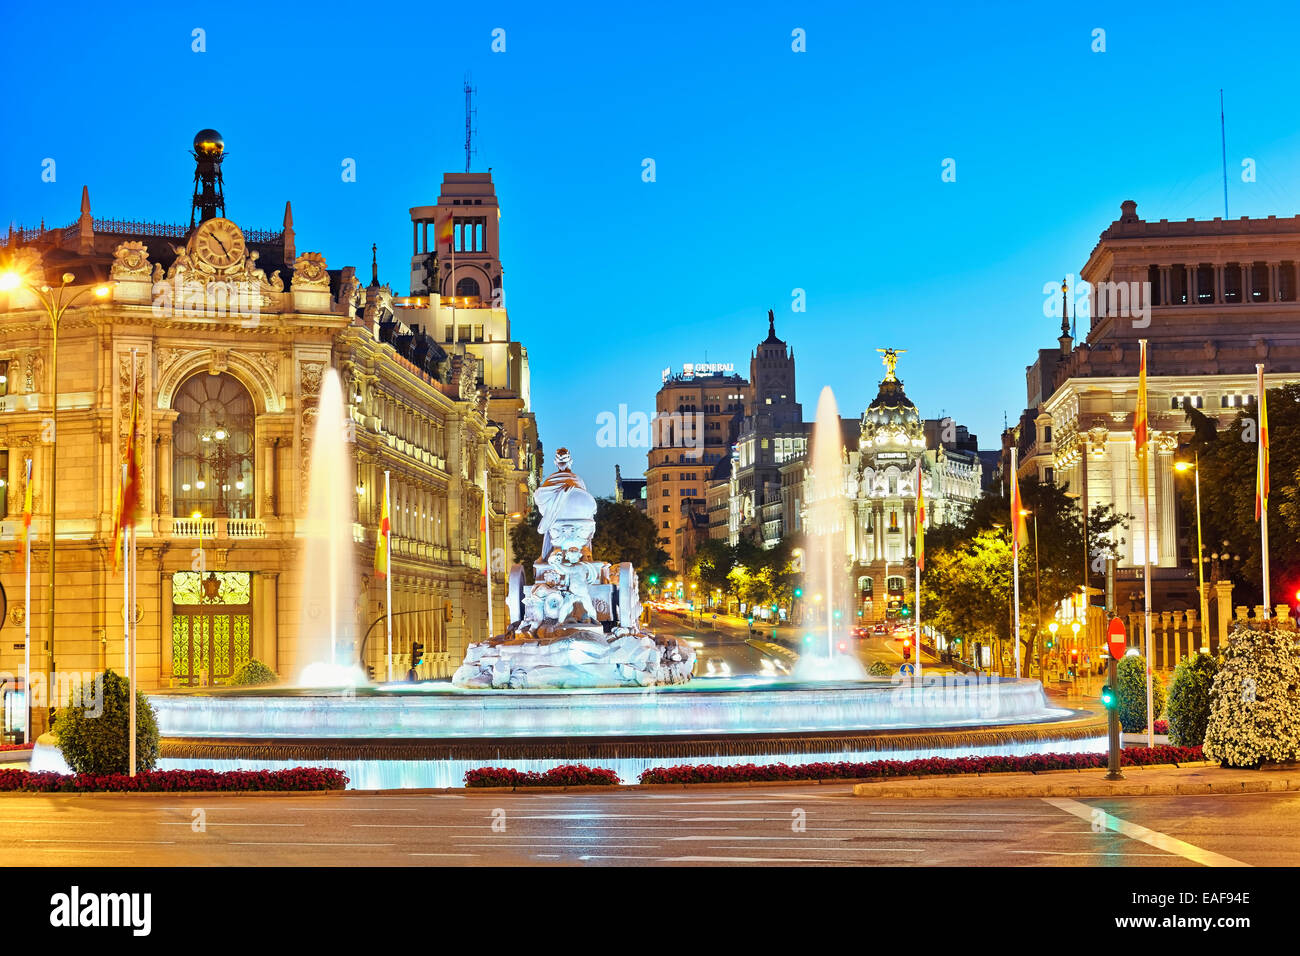 Plaza de Cibeles square with the Bank of Spain at the left, a rear view of Cibeles fountain, the Metropolis building and Gran Vi Stock Photo